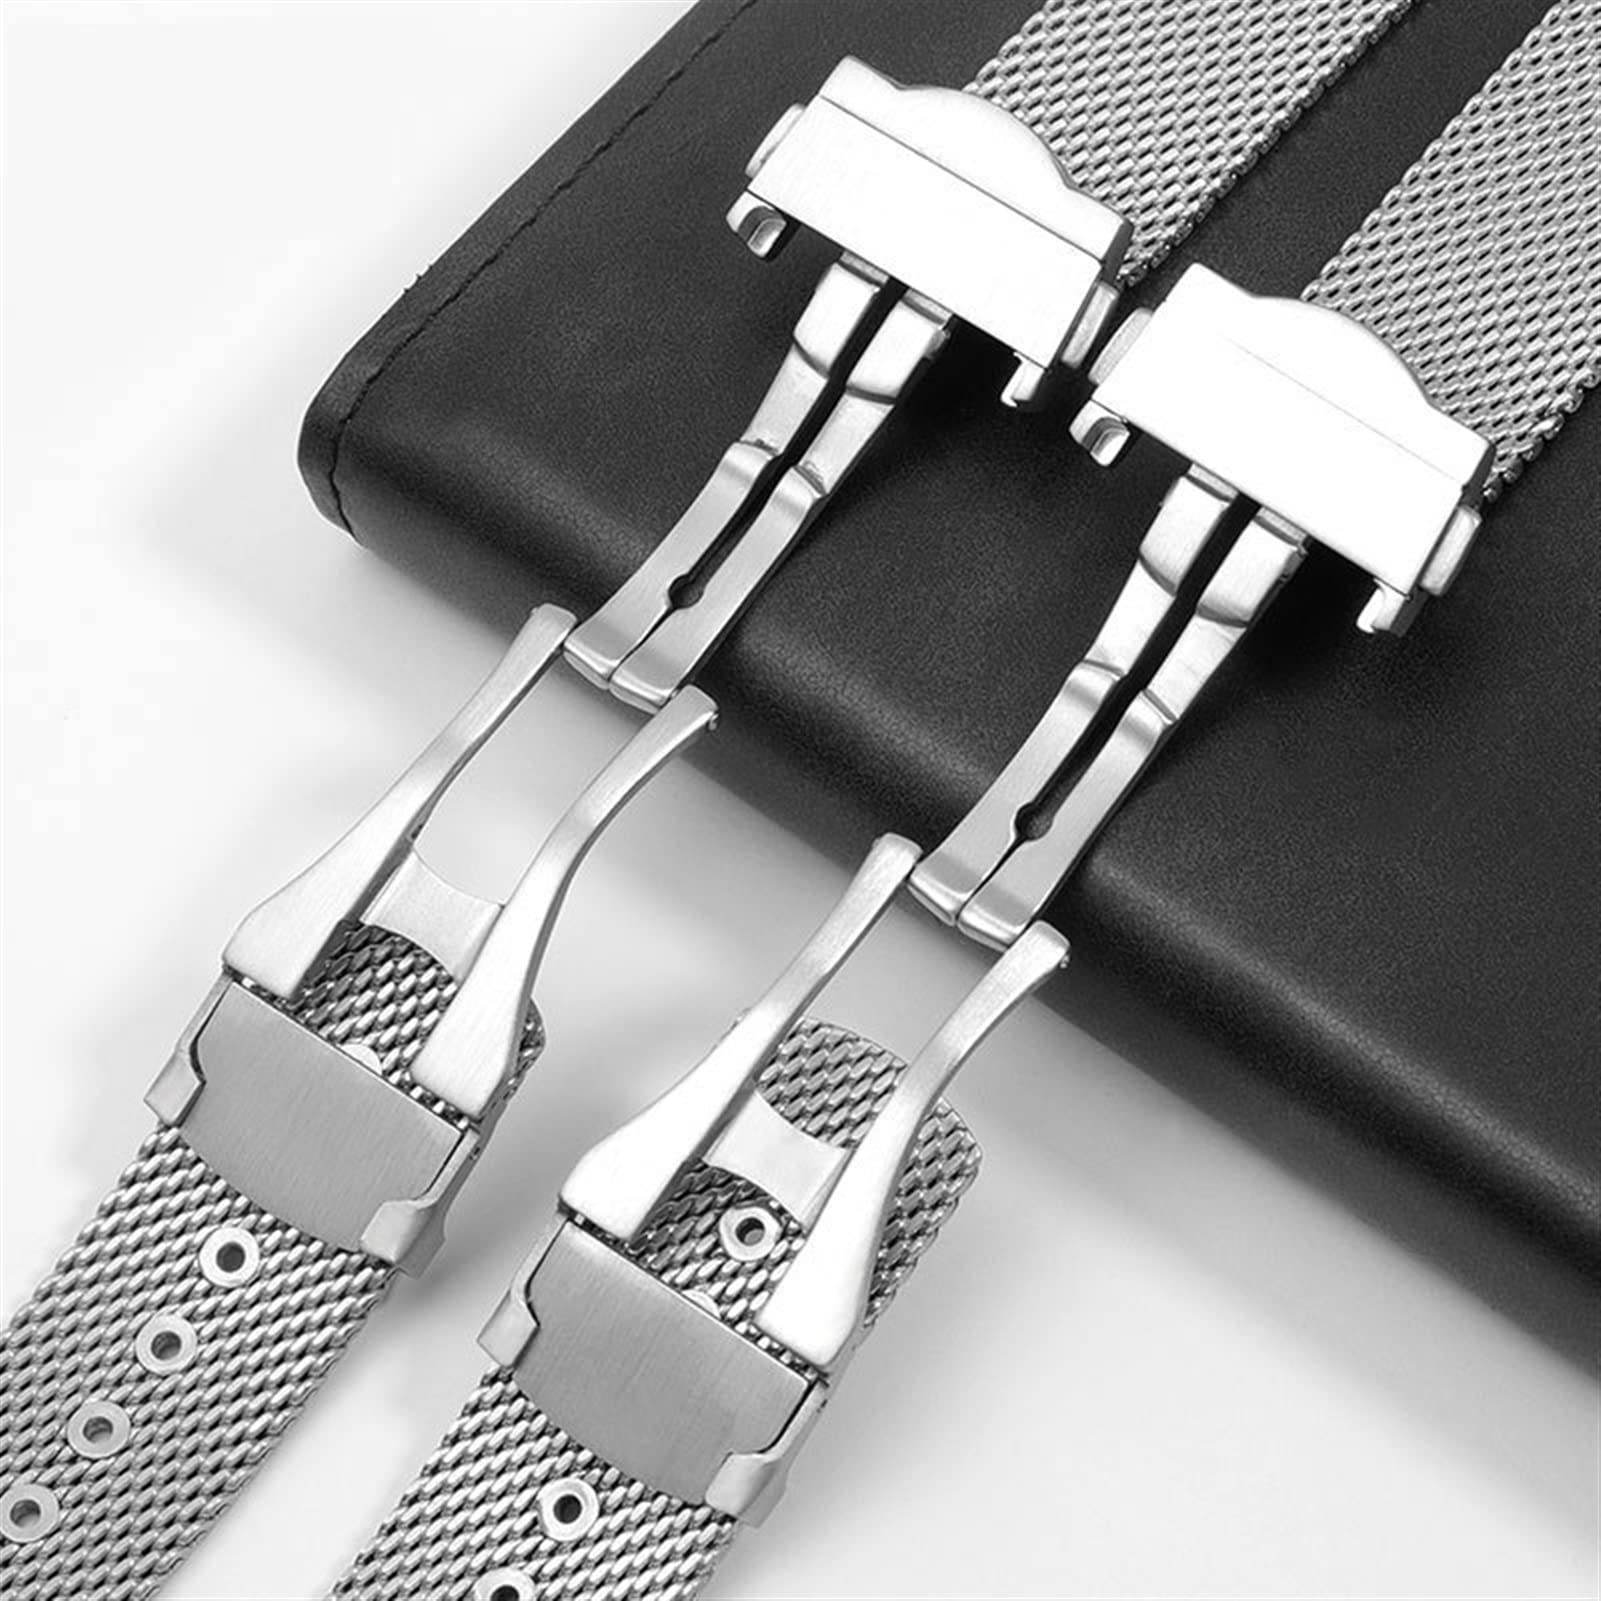 SKM Chain Watch Accessories Strap for Omega 007 Seamaster Diver 300 Watch Band Replace 20mm 22mm Milanese Stainless Bracelet (Color : Silver, Size : 20mm)